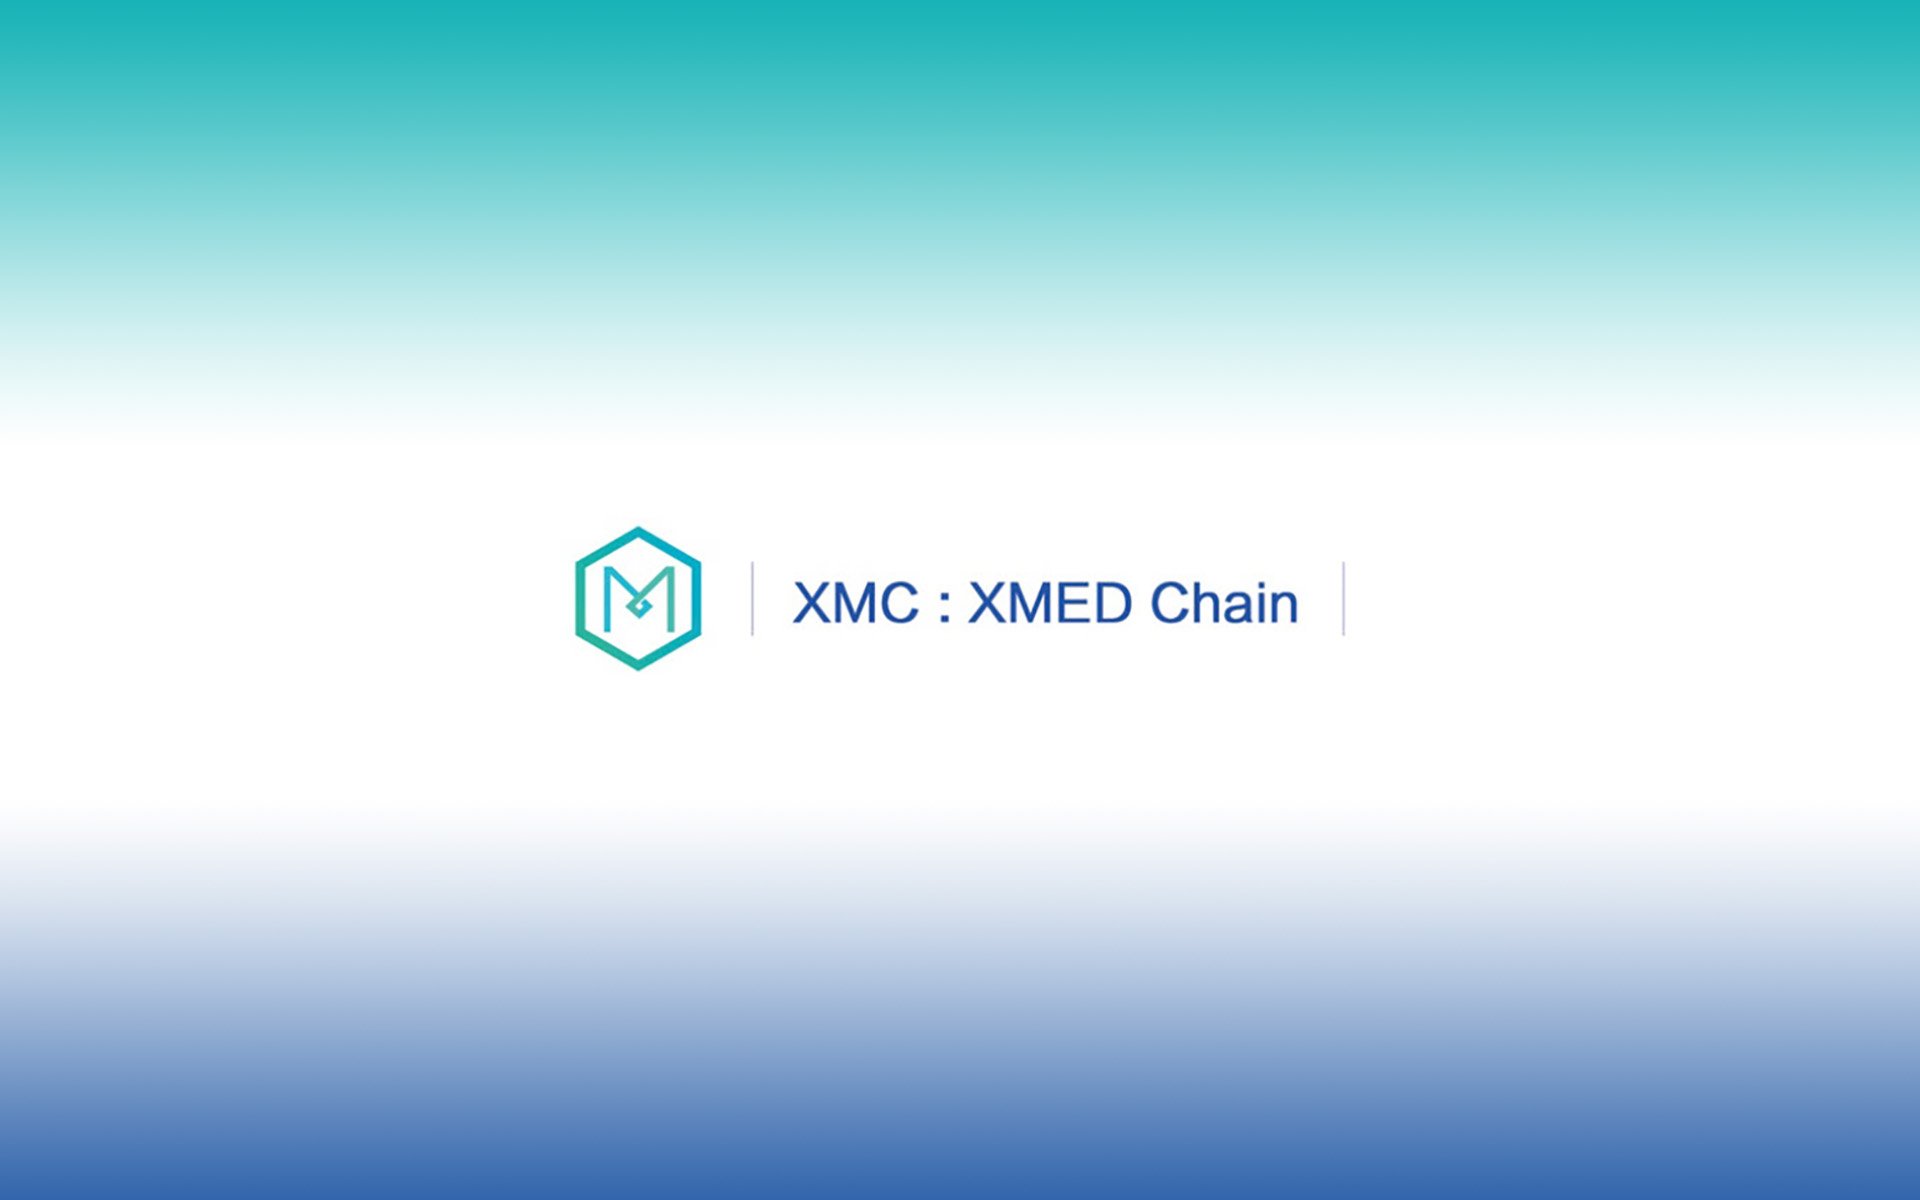 XMEDChain Goes Live With Their Much Anticipated ICO Pre-Sale - The World’s 1st Global Medical Blockchain + AI Big Data Platform